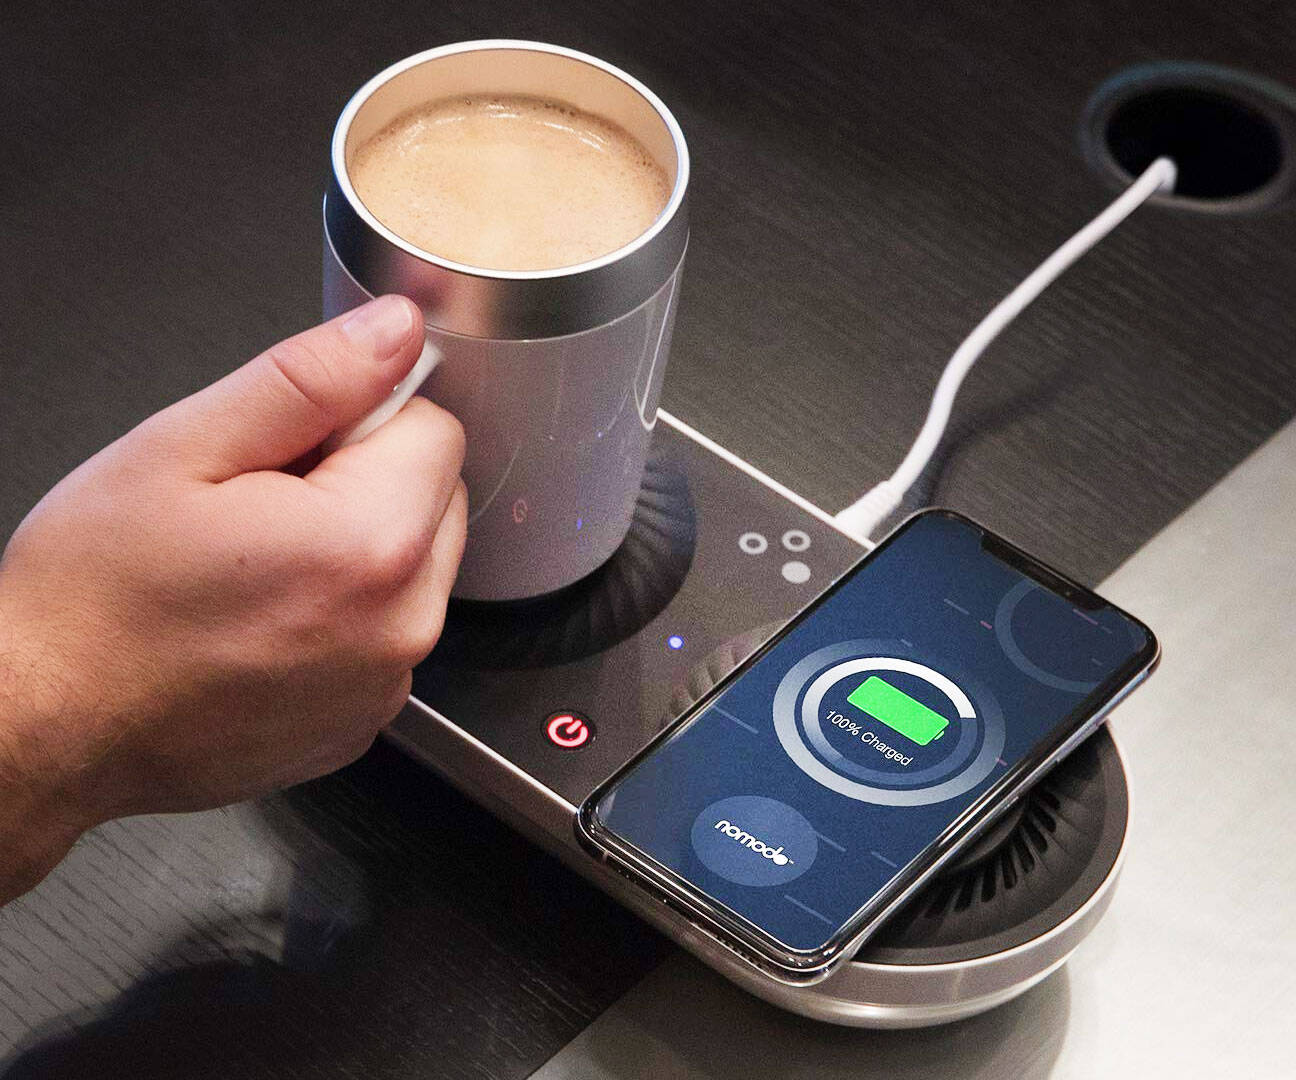 Wireless Phone Charger & Drink Warmer - http://coolthings.us